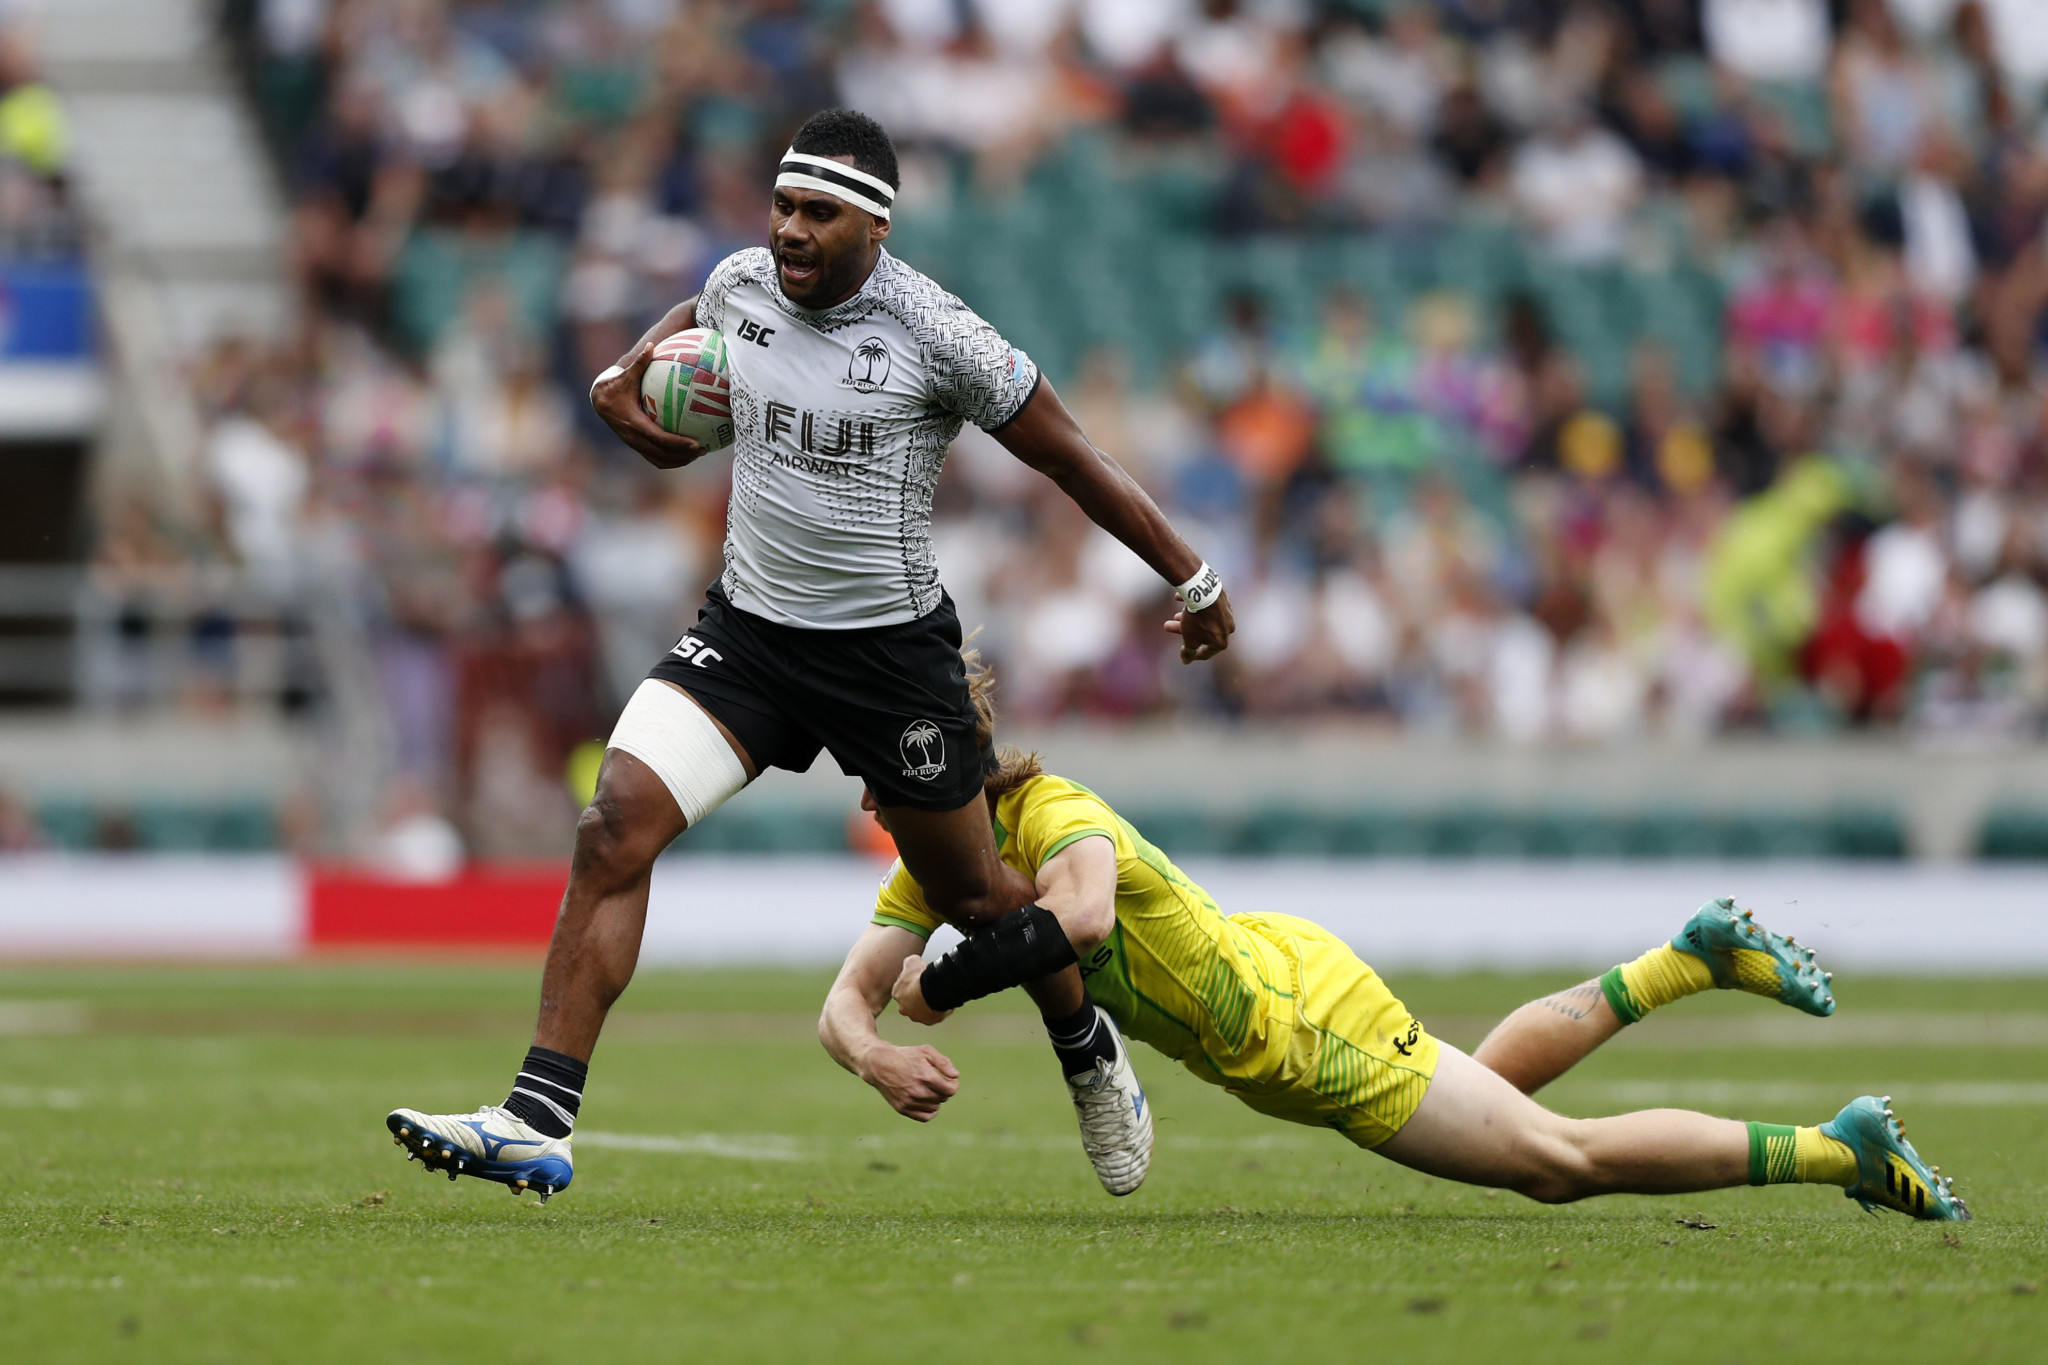 Olympic champions Fiji take overall lead with victory at World Rugby